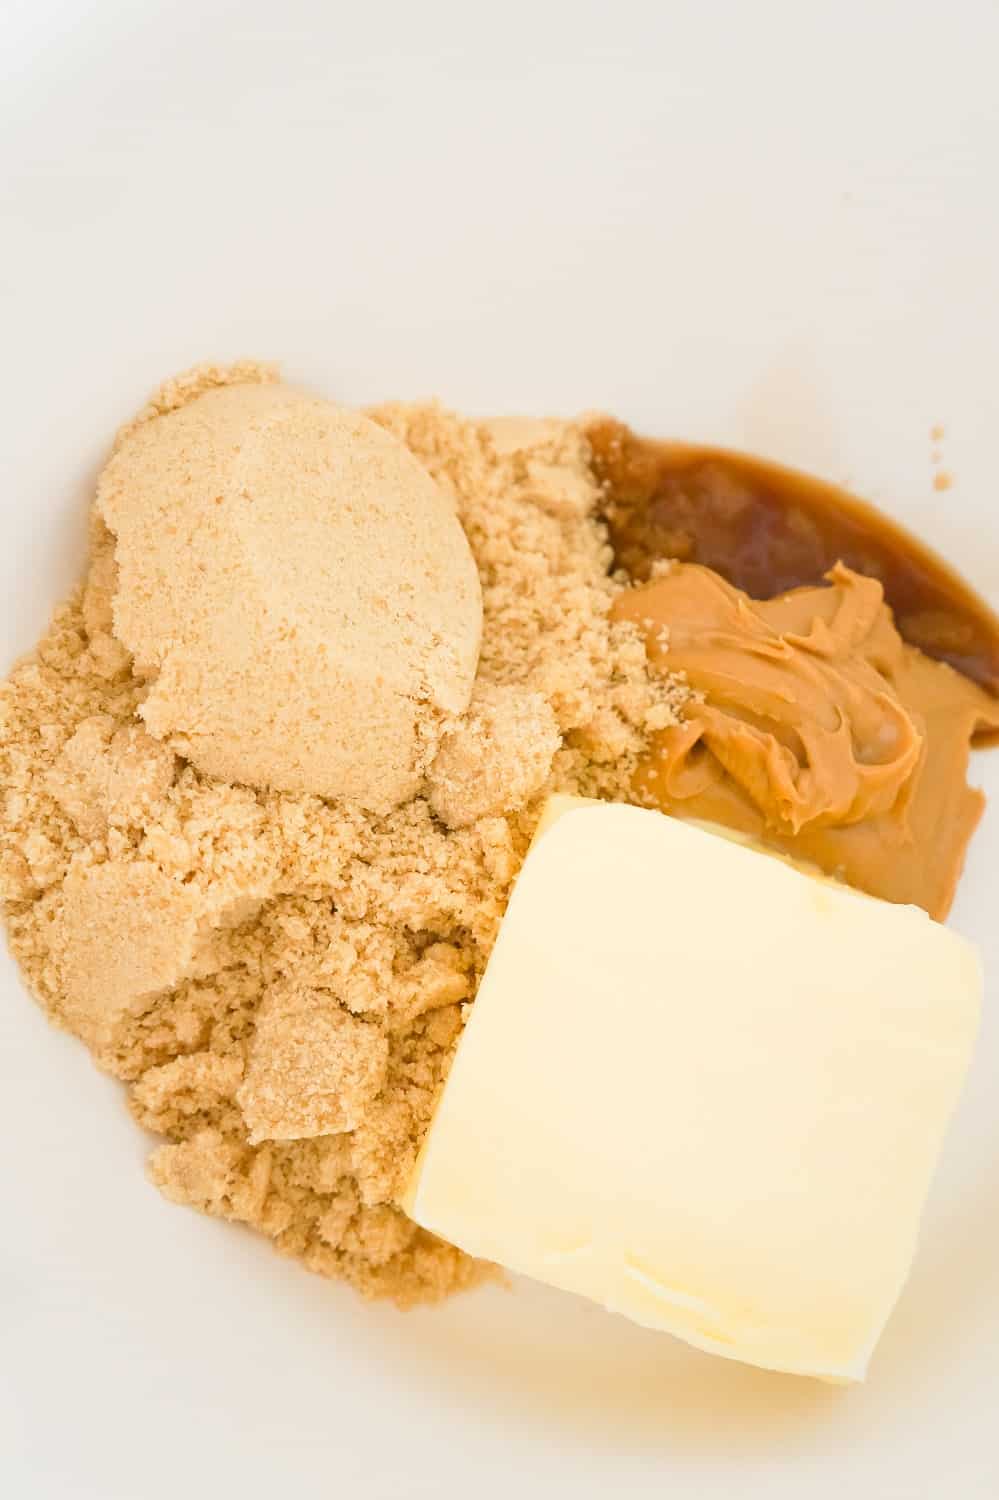 brown sugar, softened butter, smooth peanut butter and vanilla extract in a mixing bowl